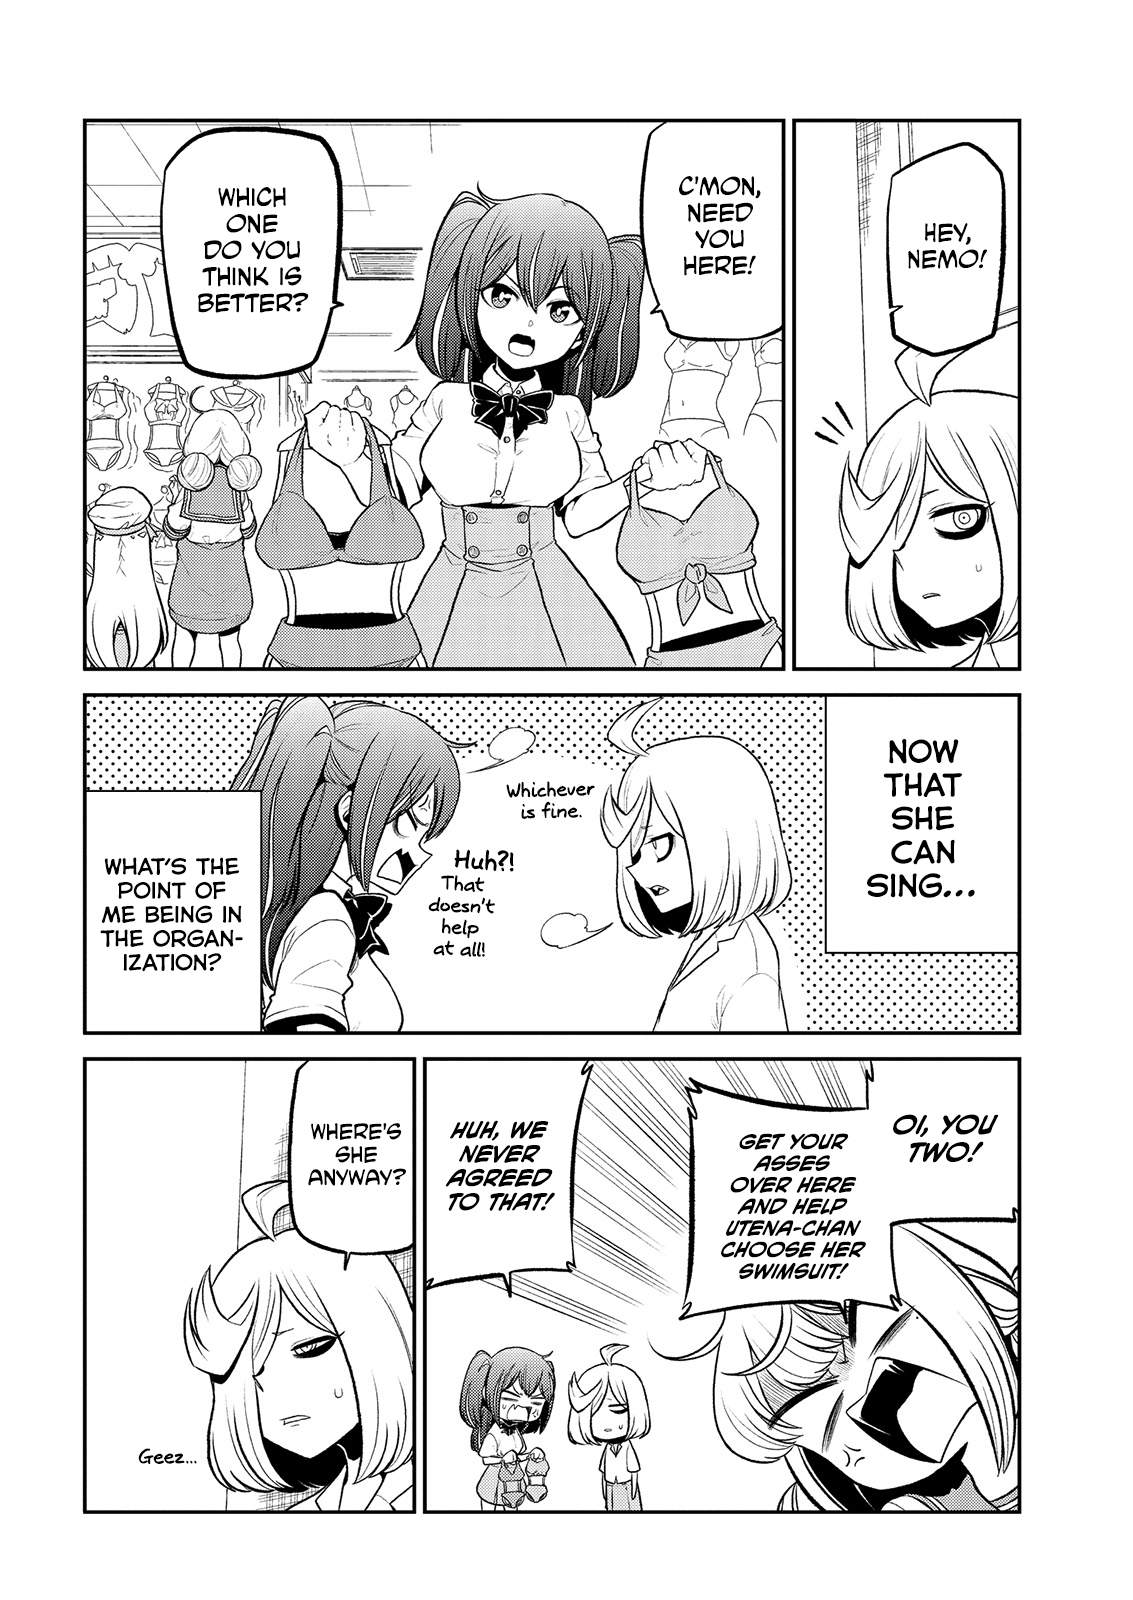 Looking Up To Magical Girls - Page 3